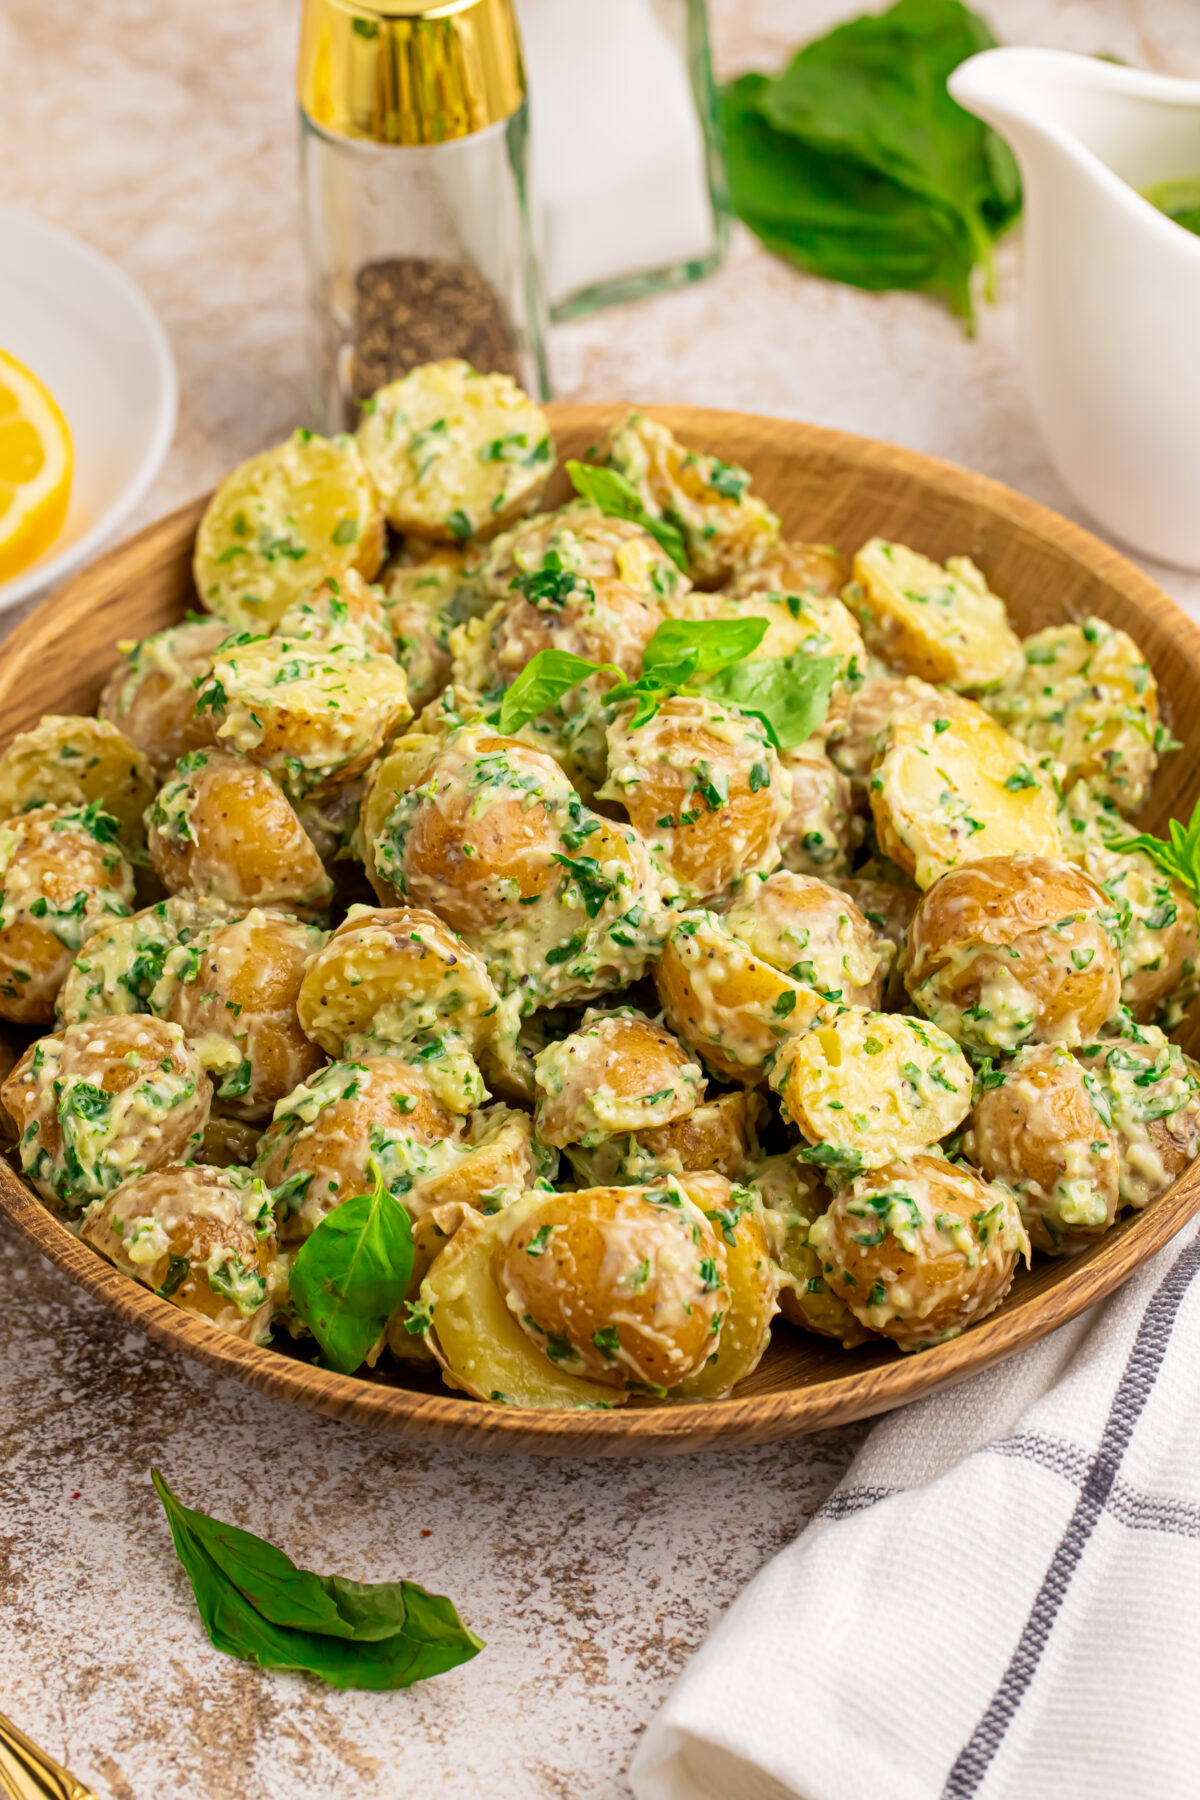 Whip up our Creamy Pesto Potato Salad for a fresh twist on a classic! Explore our easy recipe and make your next gathering unforgettable.